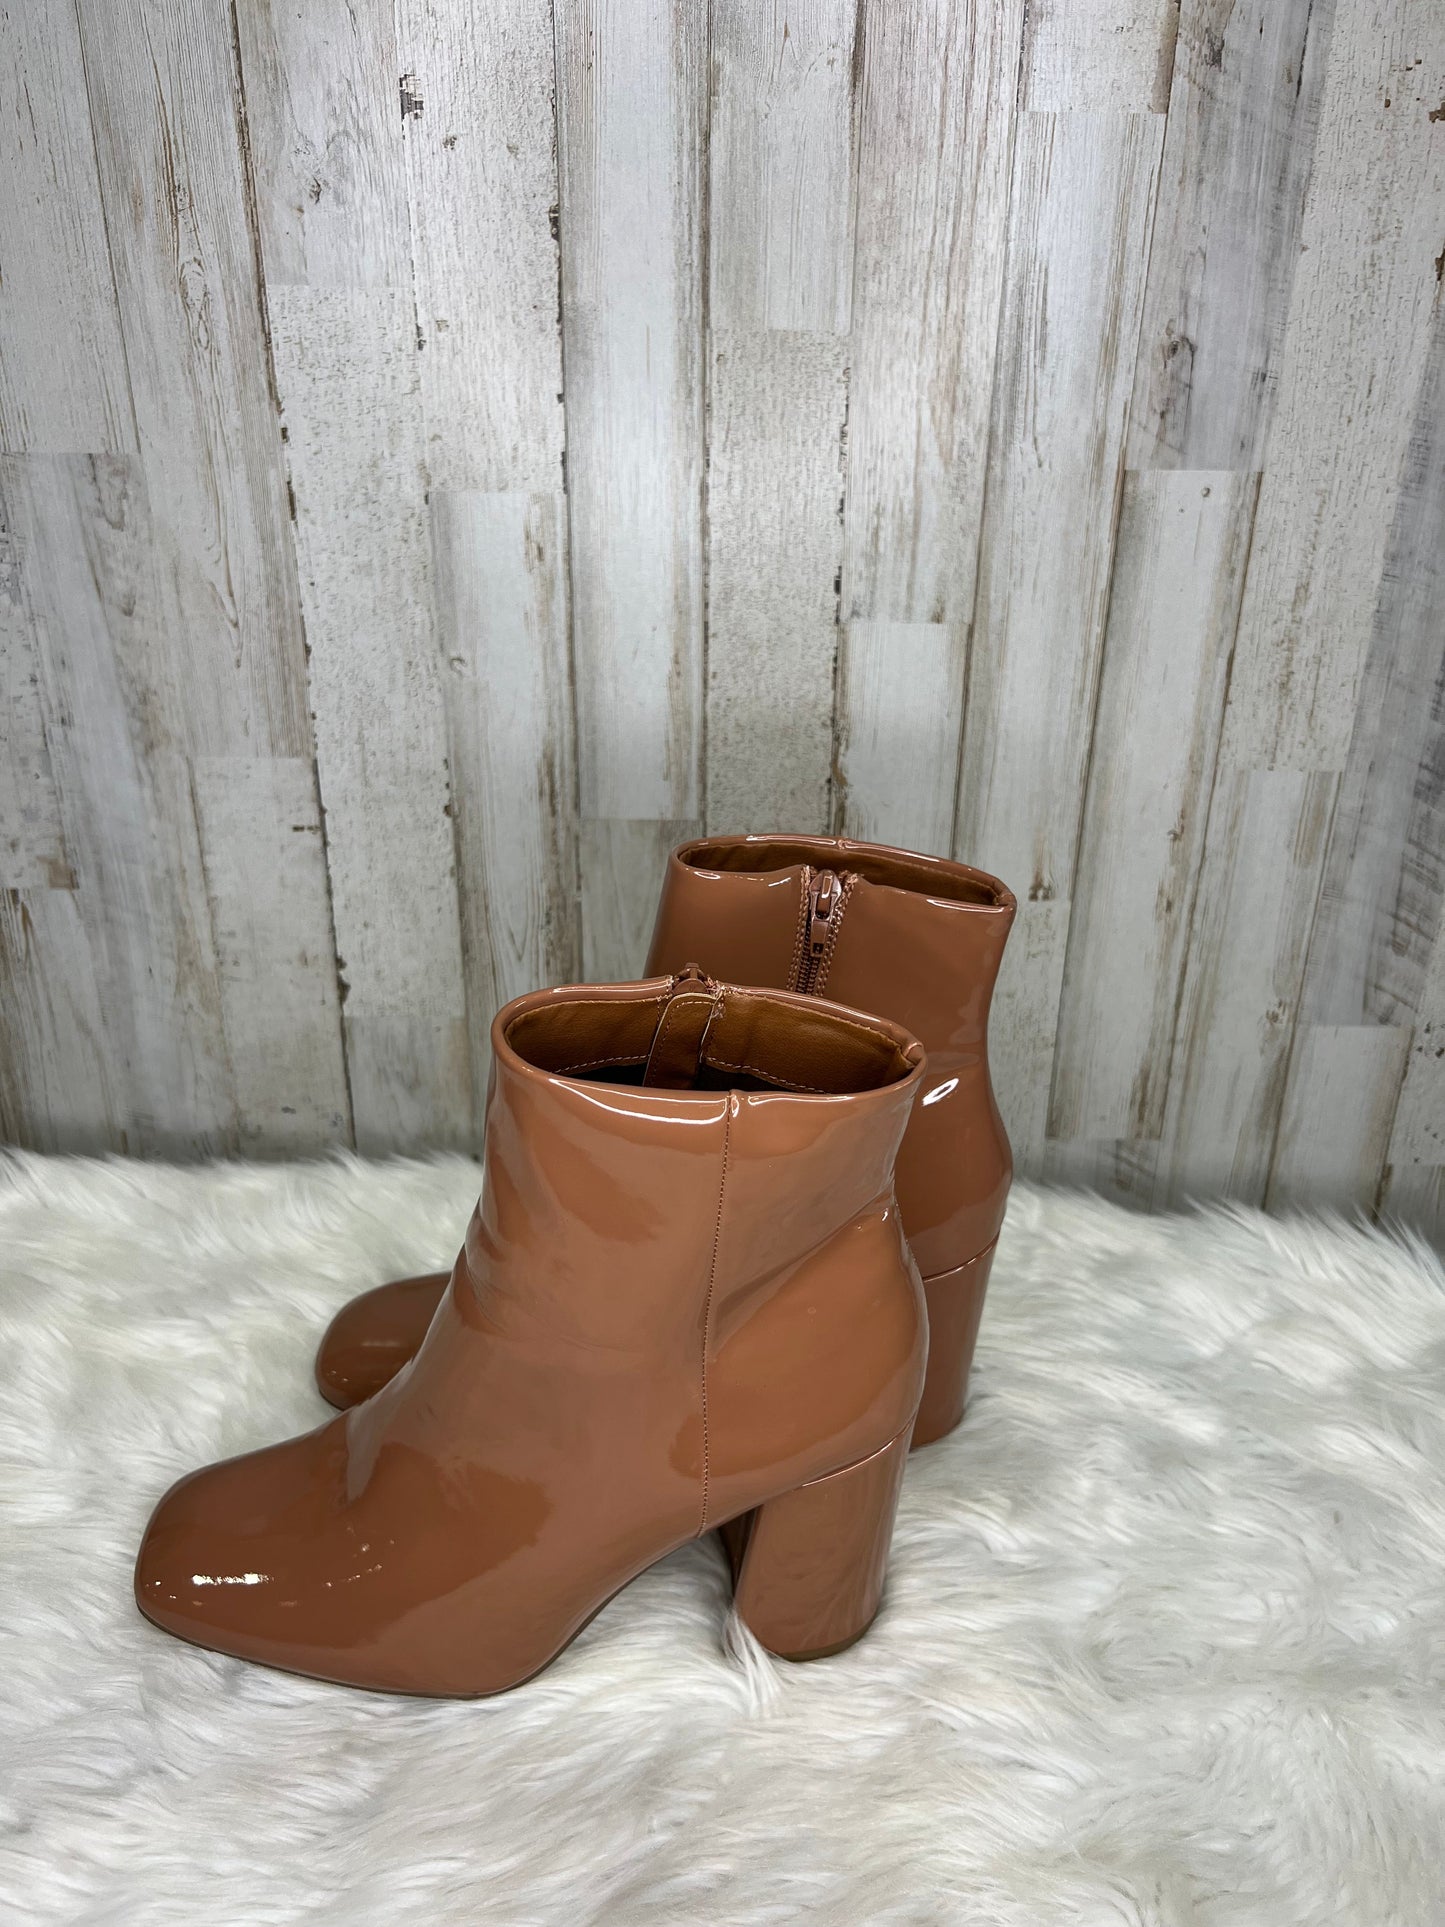 Boots Ankle Heels By Madden Girl  Size: 9